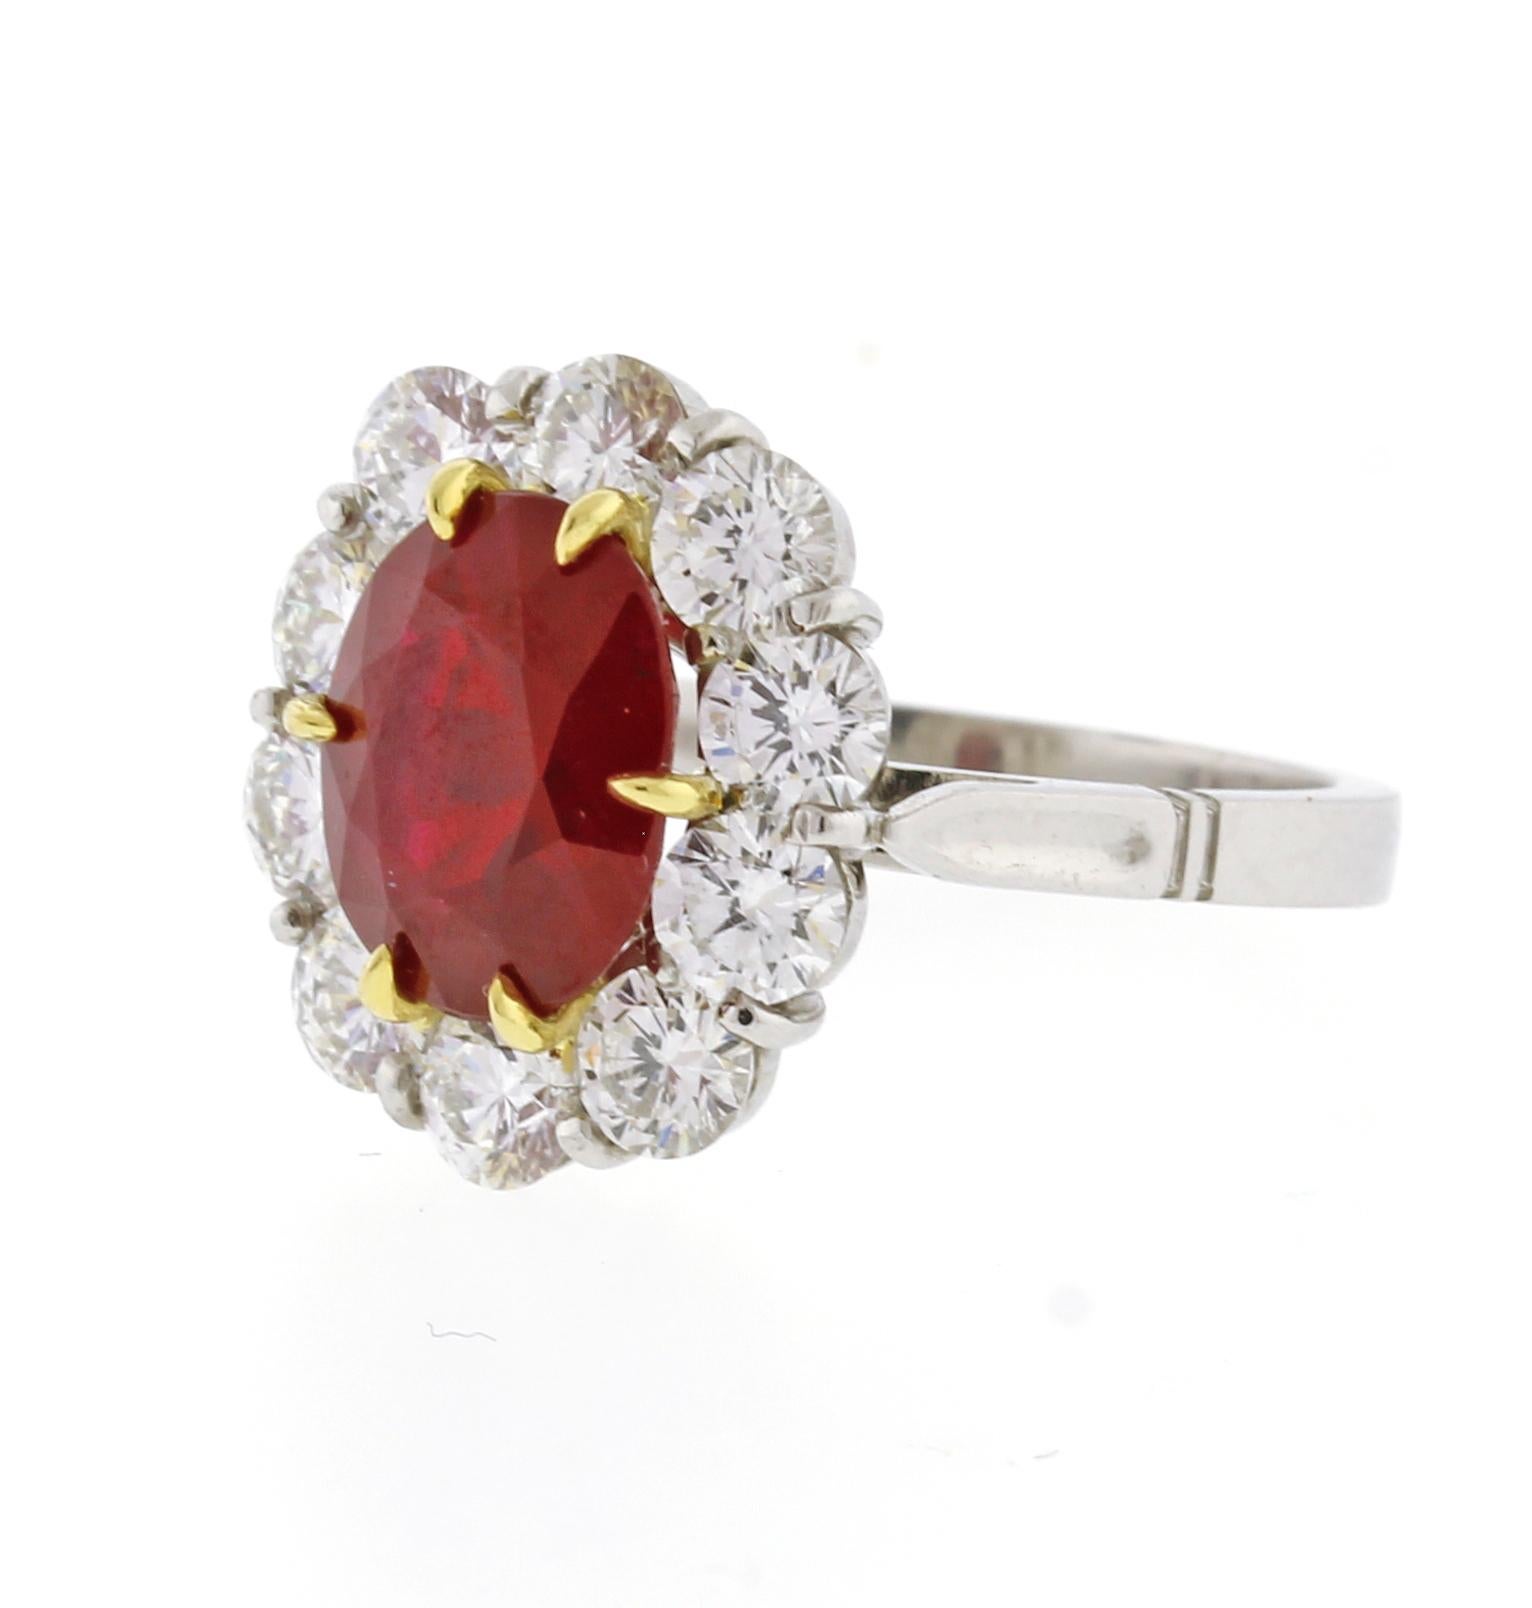 Oval Cut 3.11 Carat A.G.L Burma Ruby and Diamond Ring For Sale